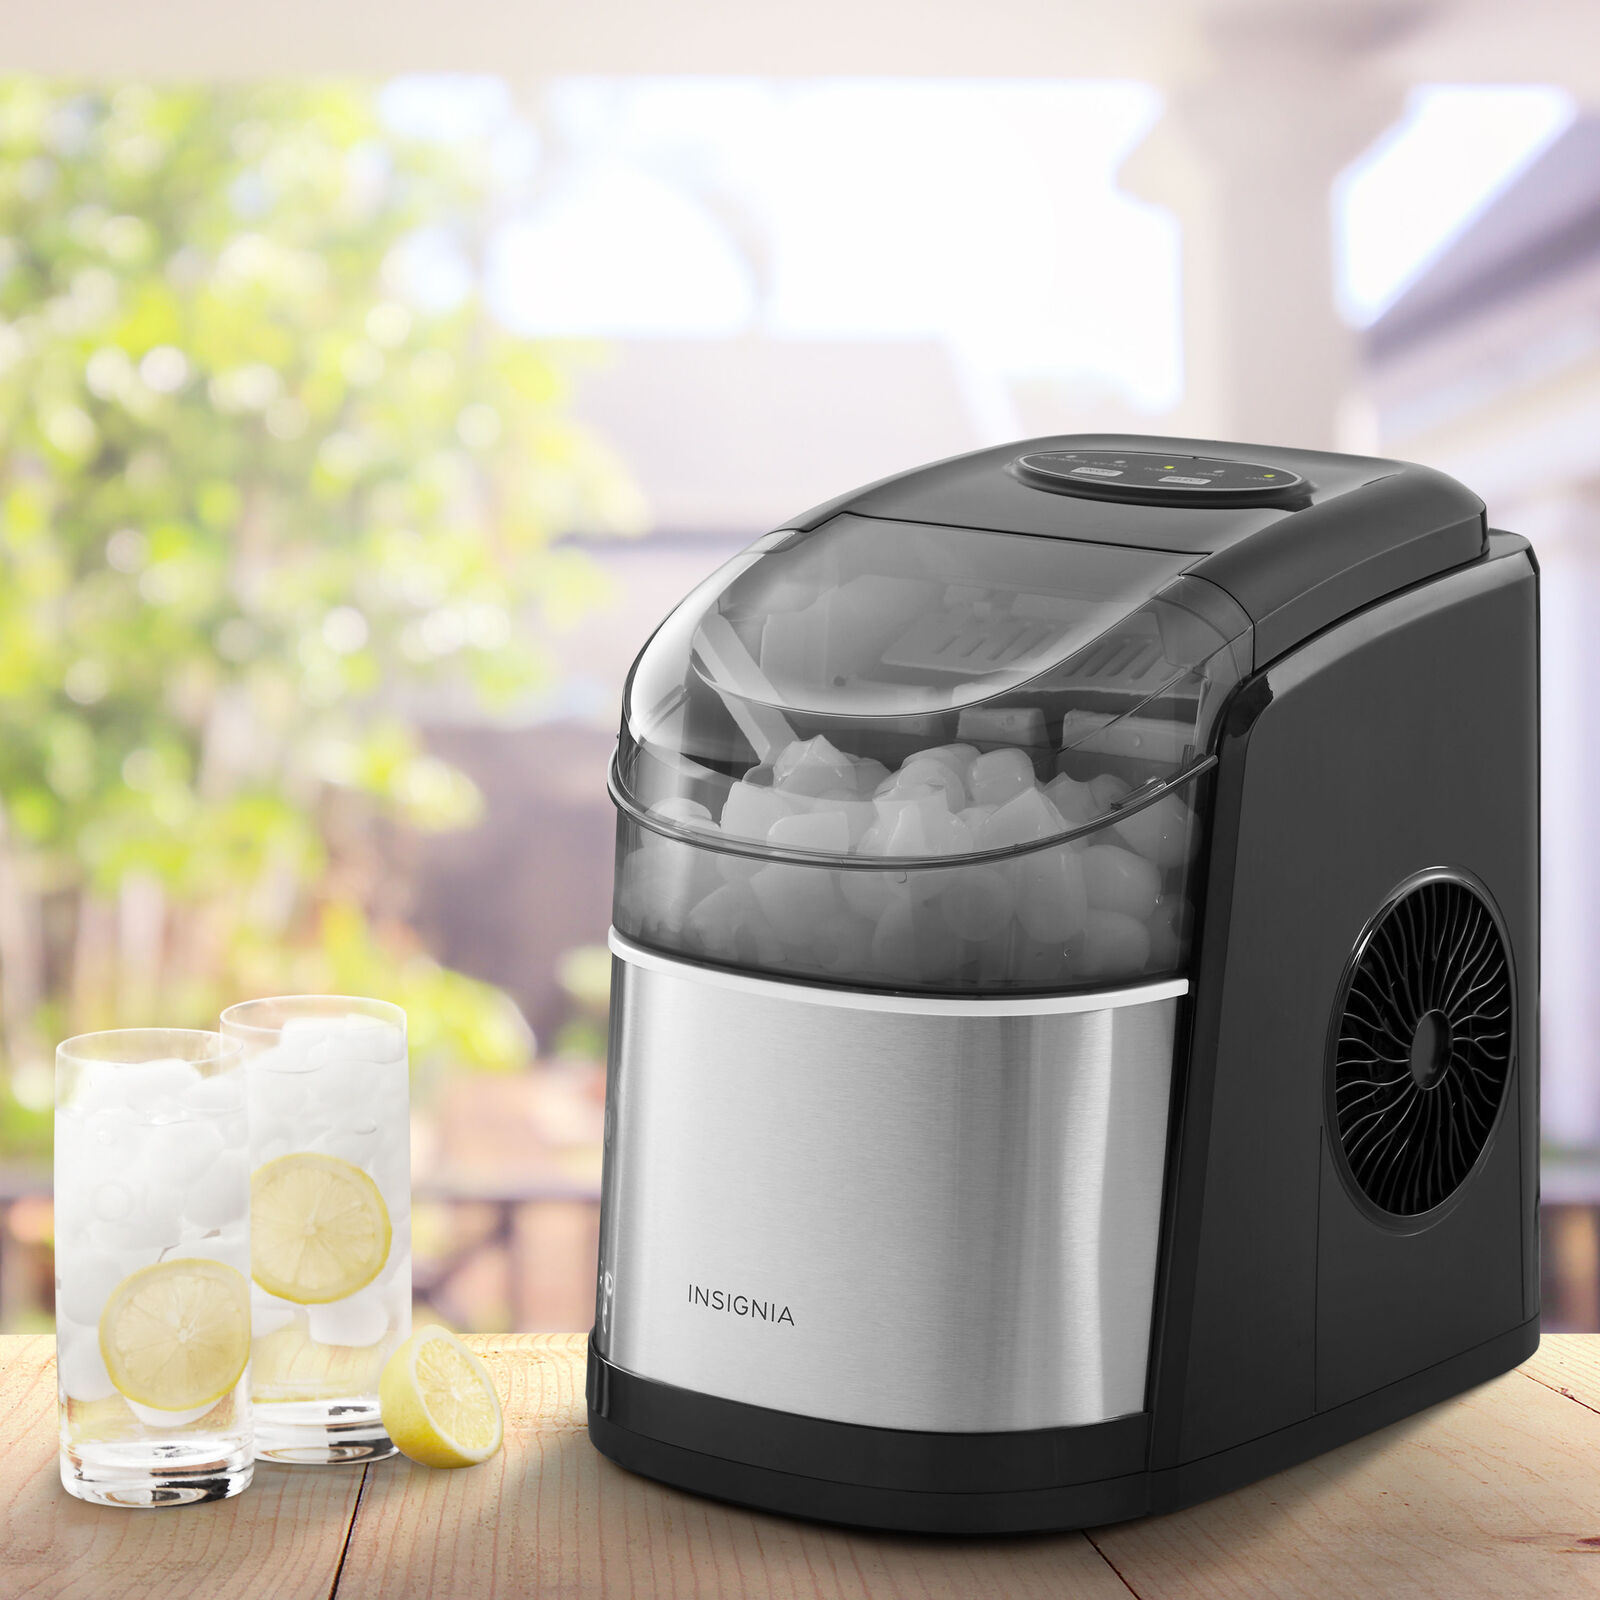 33-Lb Insignia™ Portable Icemaker w/ Auto Shut-Off (Stainless steel) $120 + Free Shipping